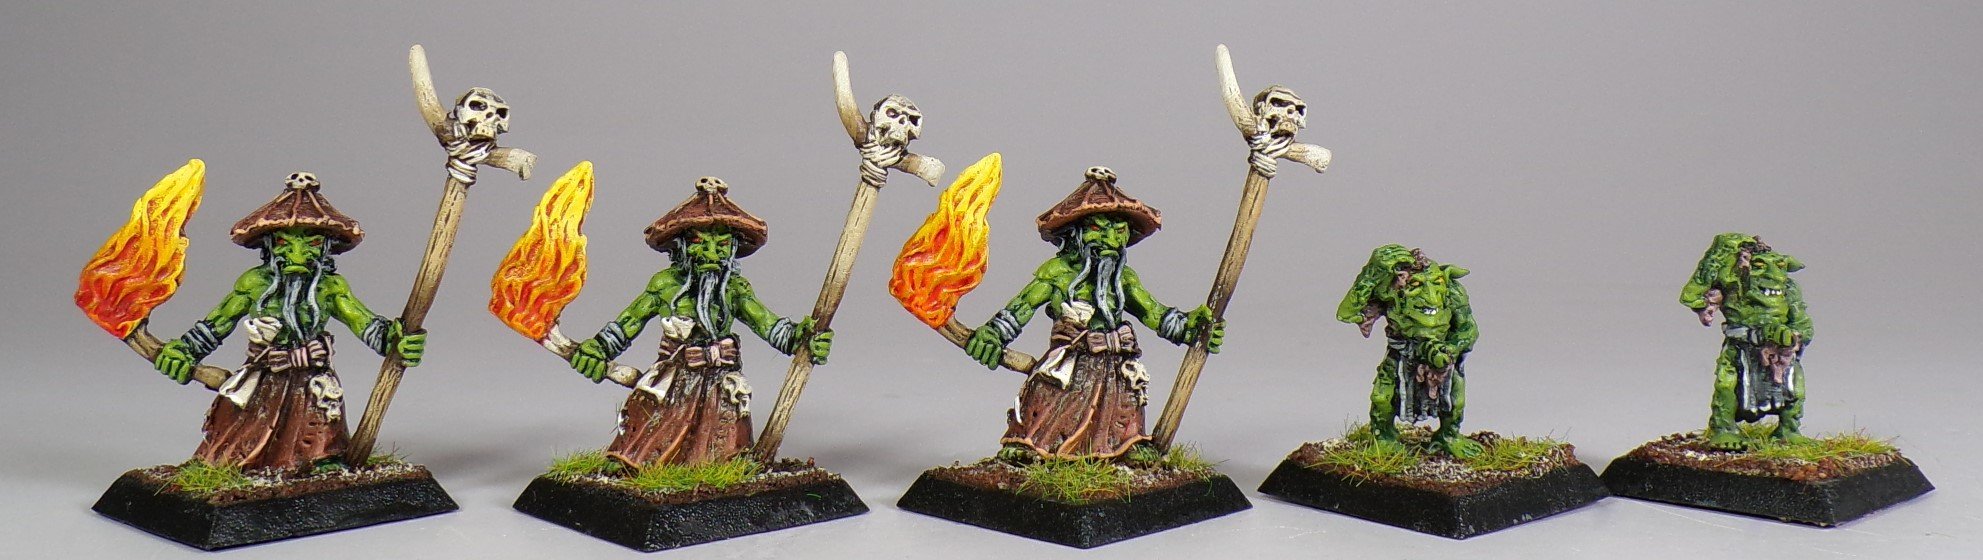 L5R Legend of the Five Rings Miniature Painting Service Paintedfigs (28).jpg